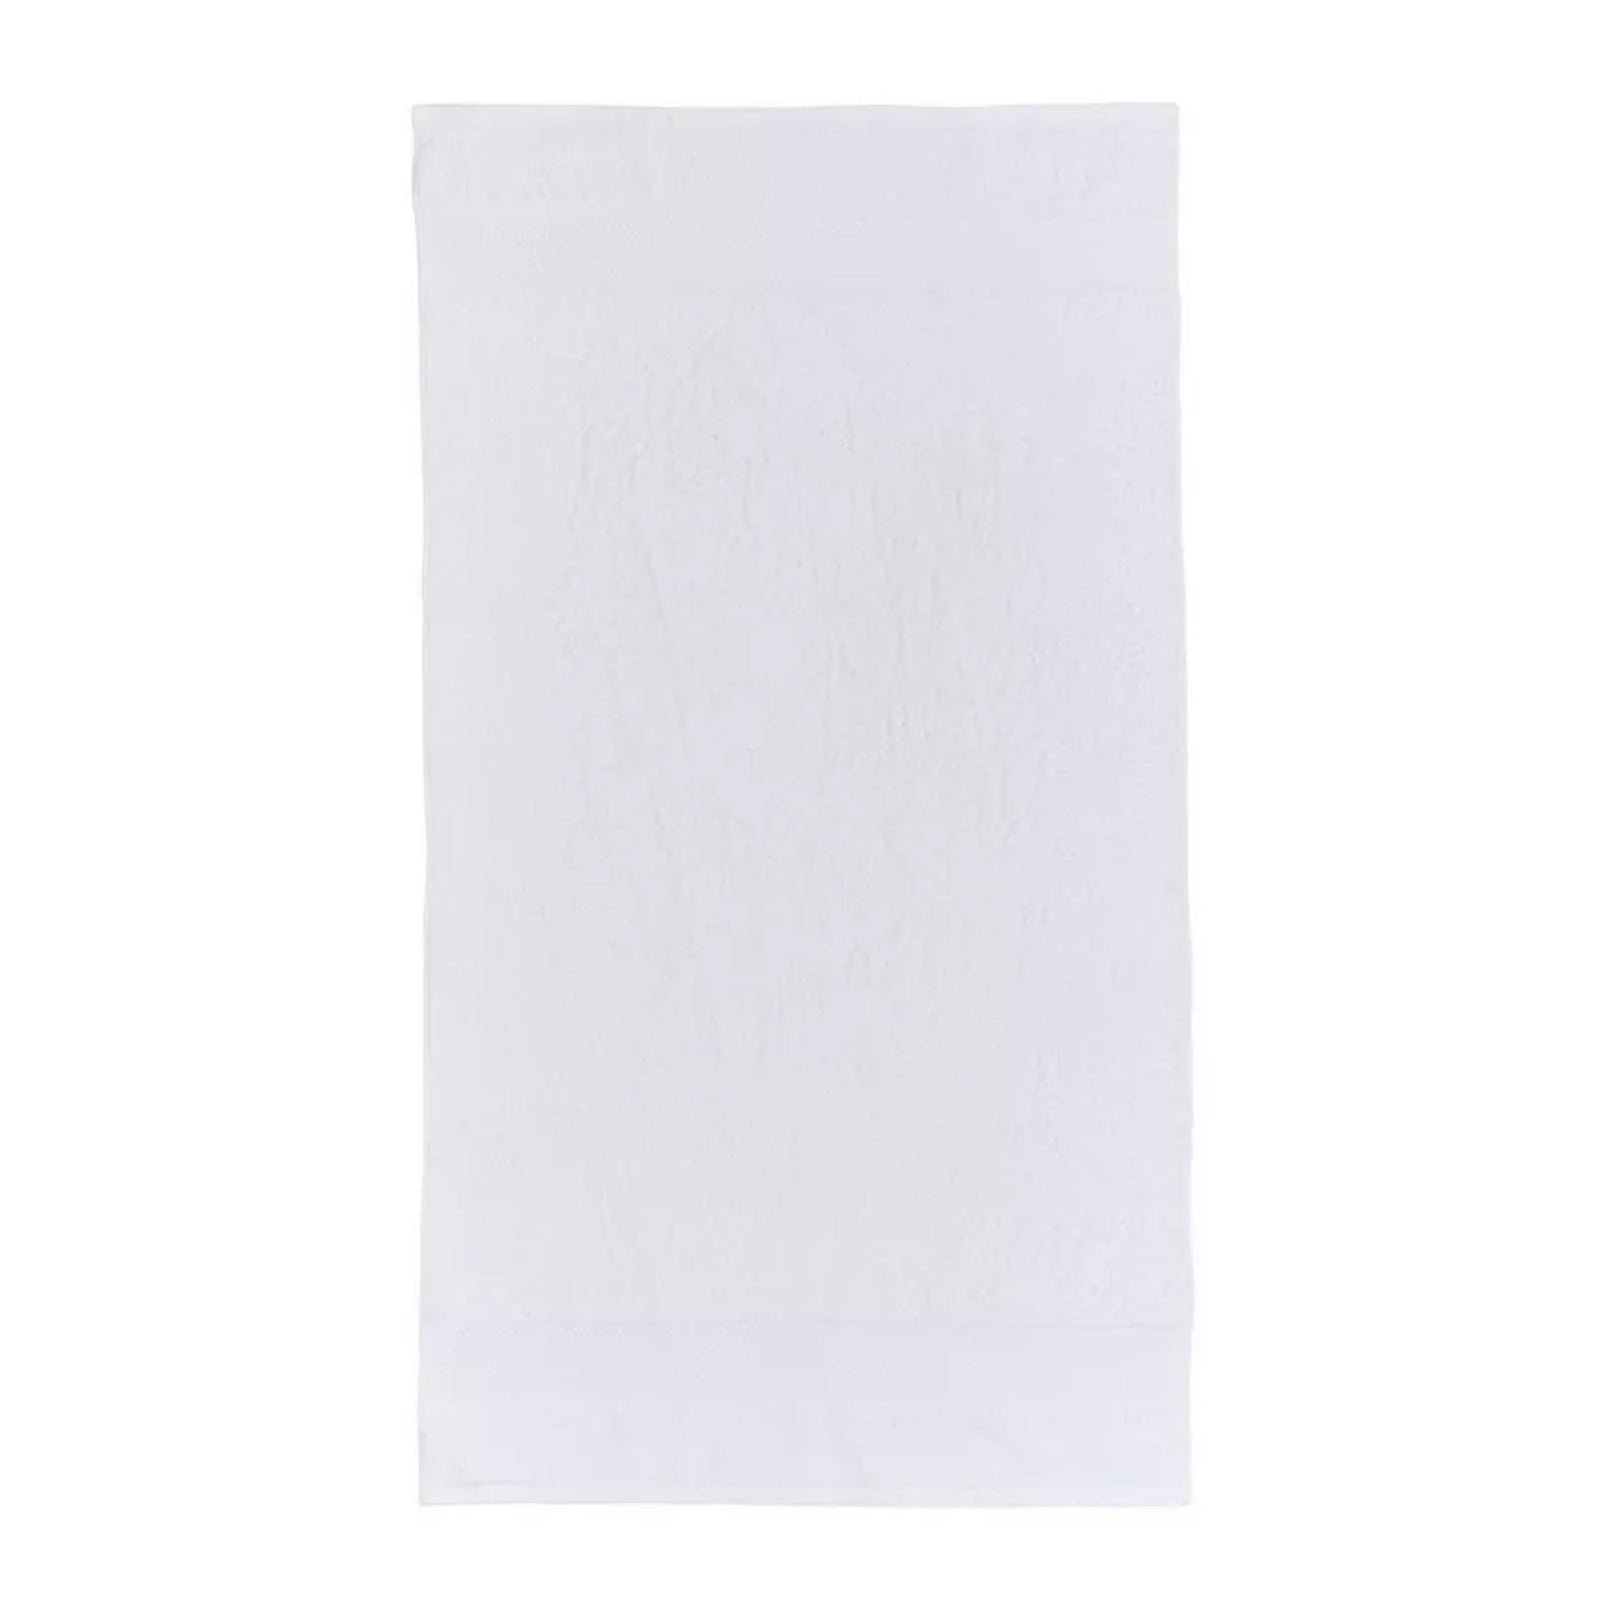 Helena Springfield 'Jazz' Cotton Towels in White